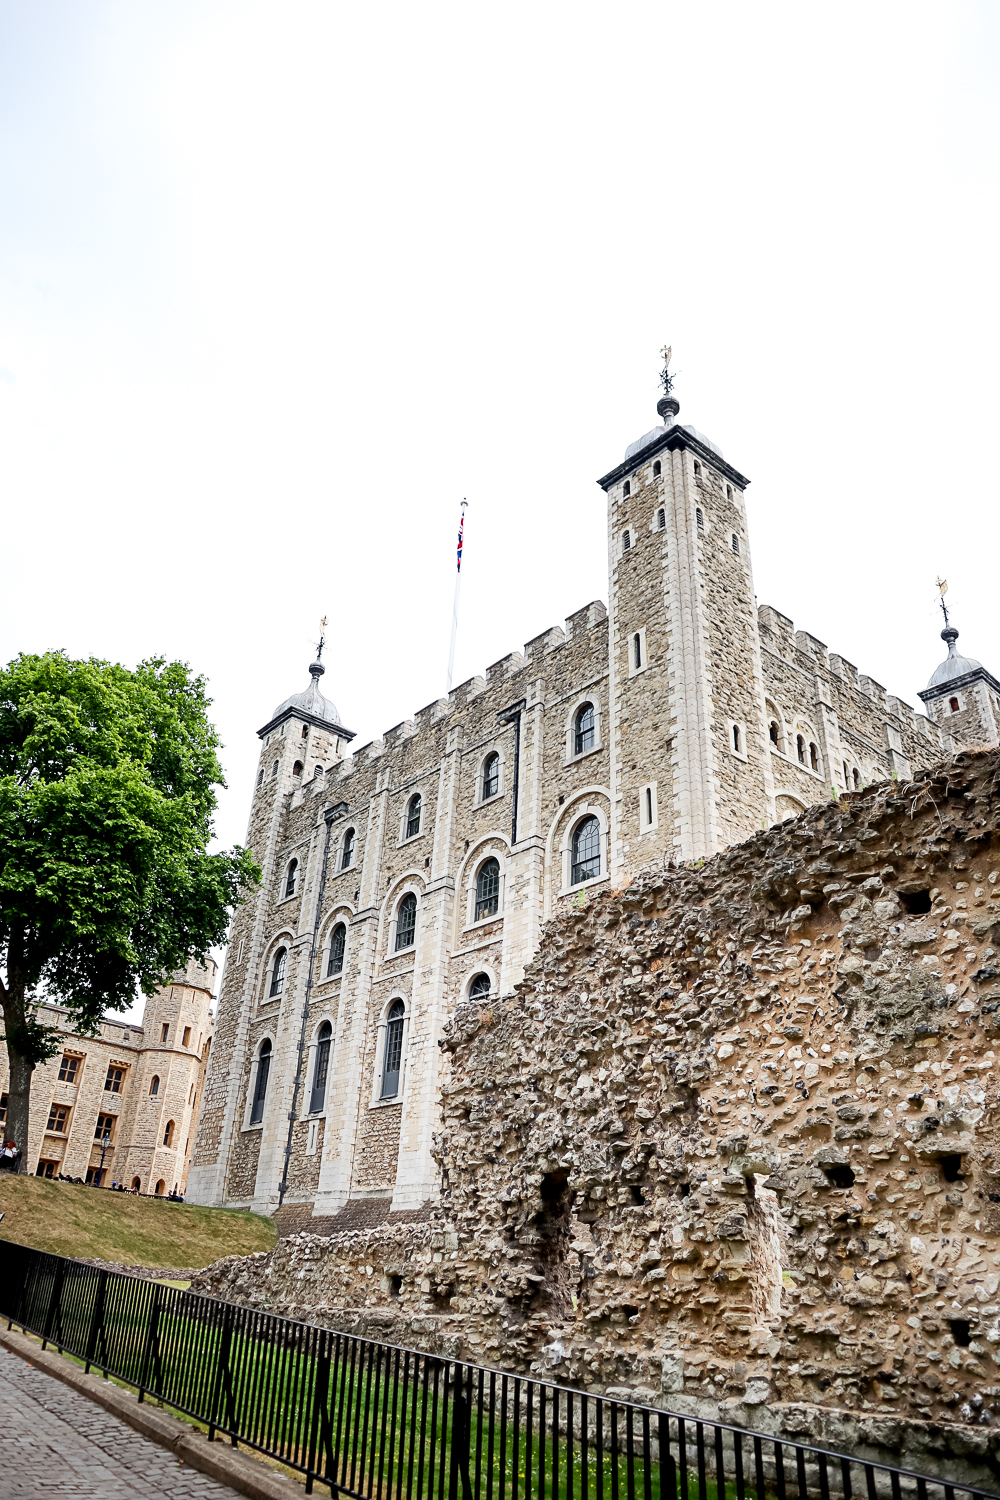 Pacific Globetrotters, budget family travel blog, shares 4 day itinerary in London with kids. Tower Of London